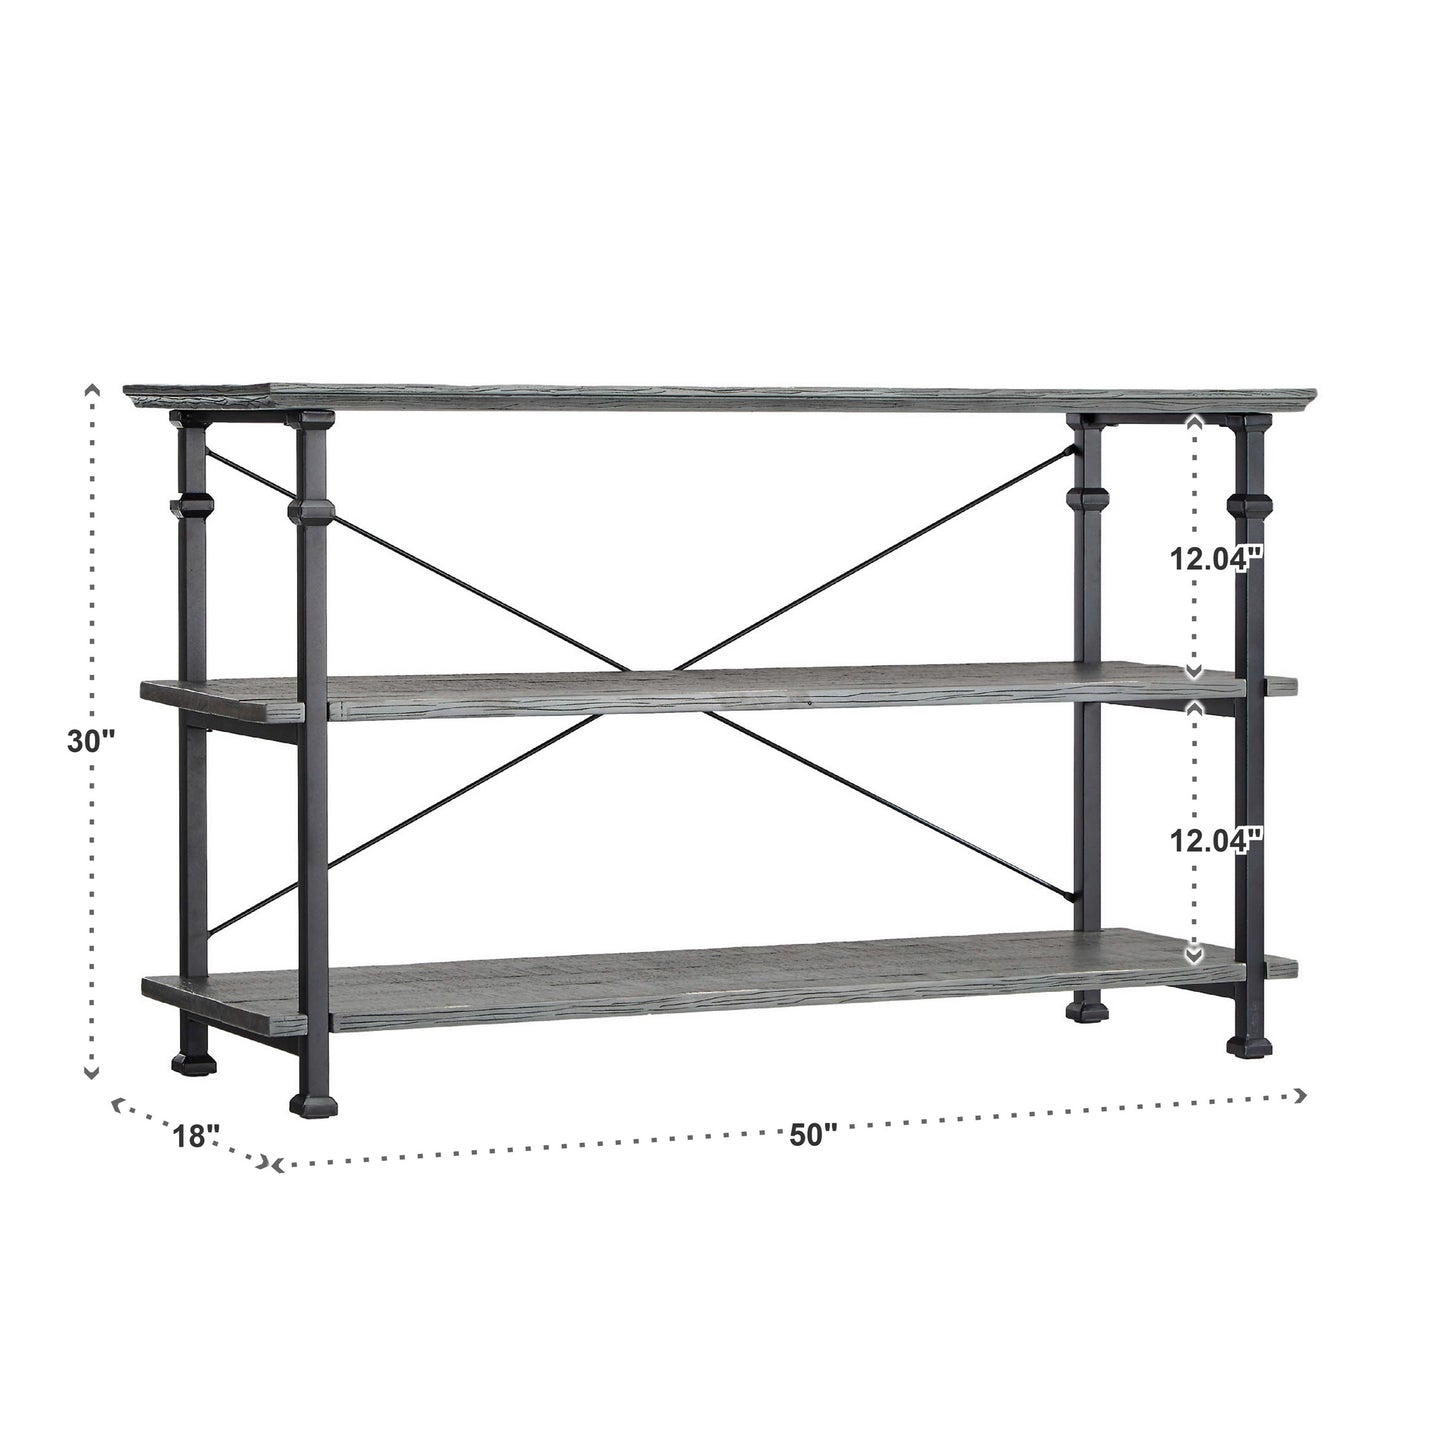 Vintage Industrial TV Stand - Grey Finish